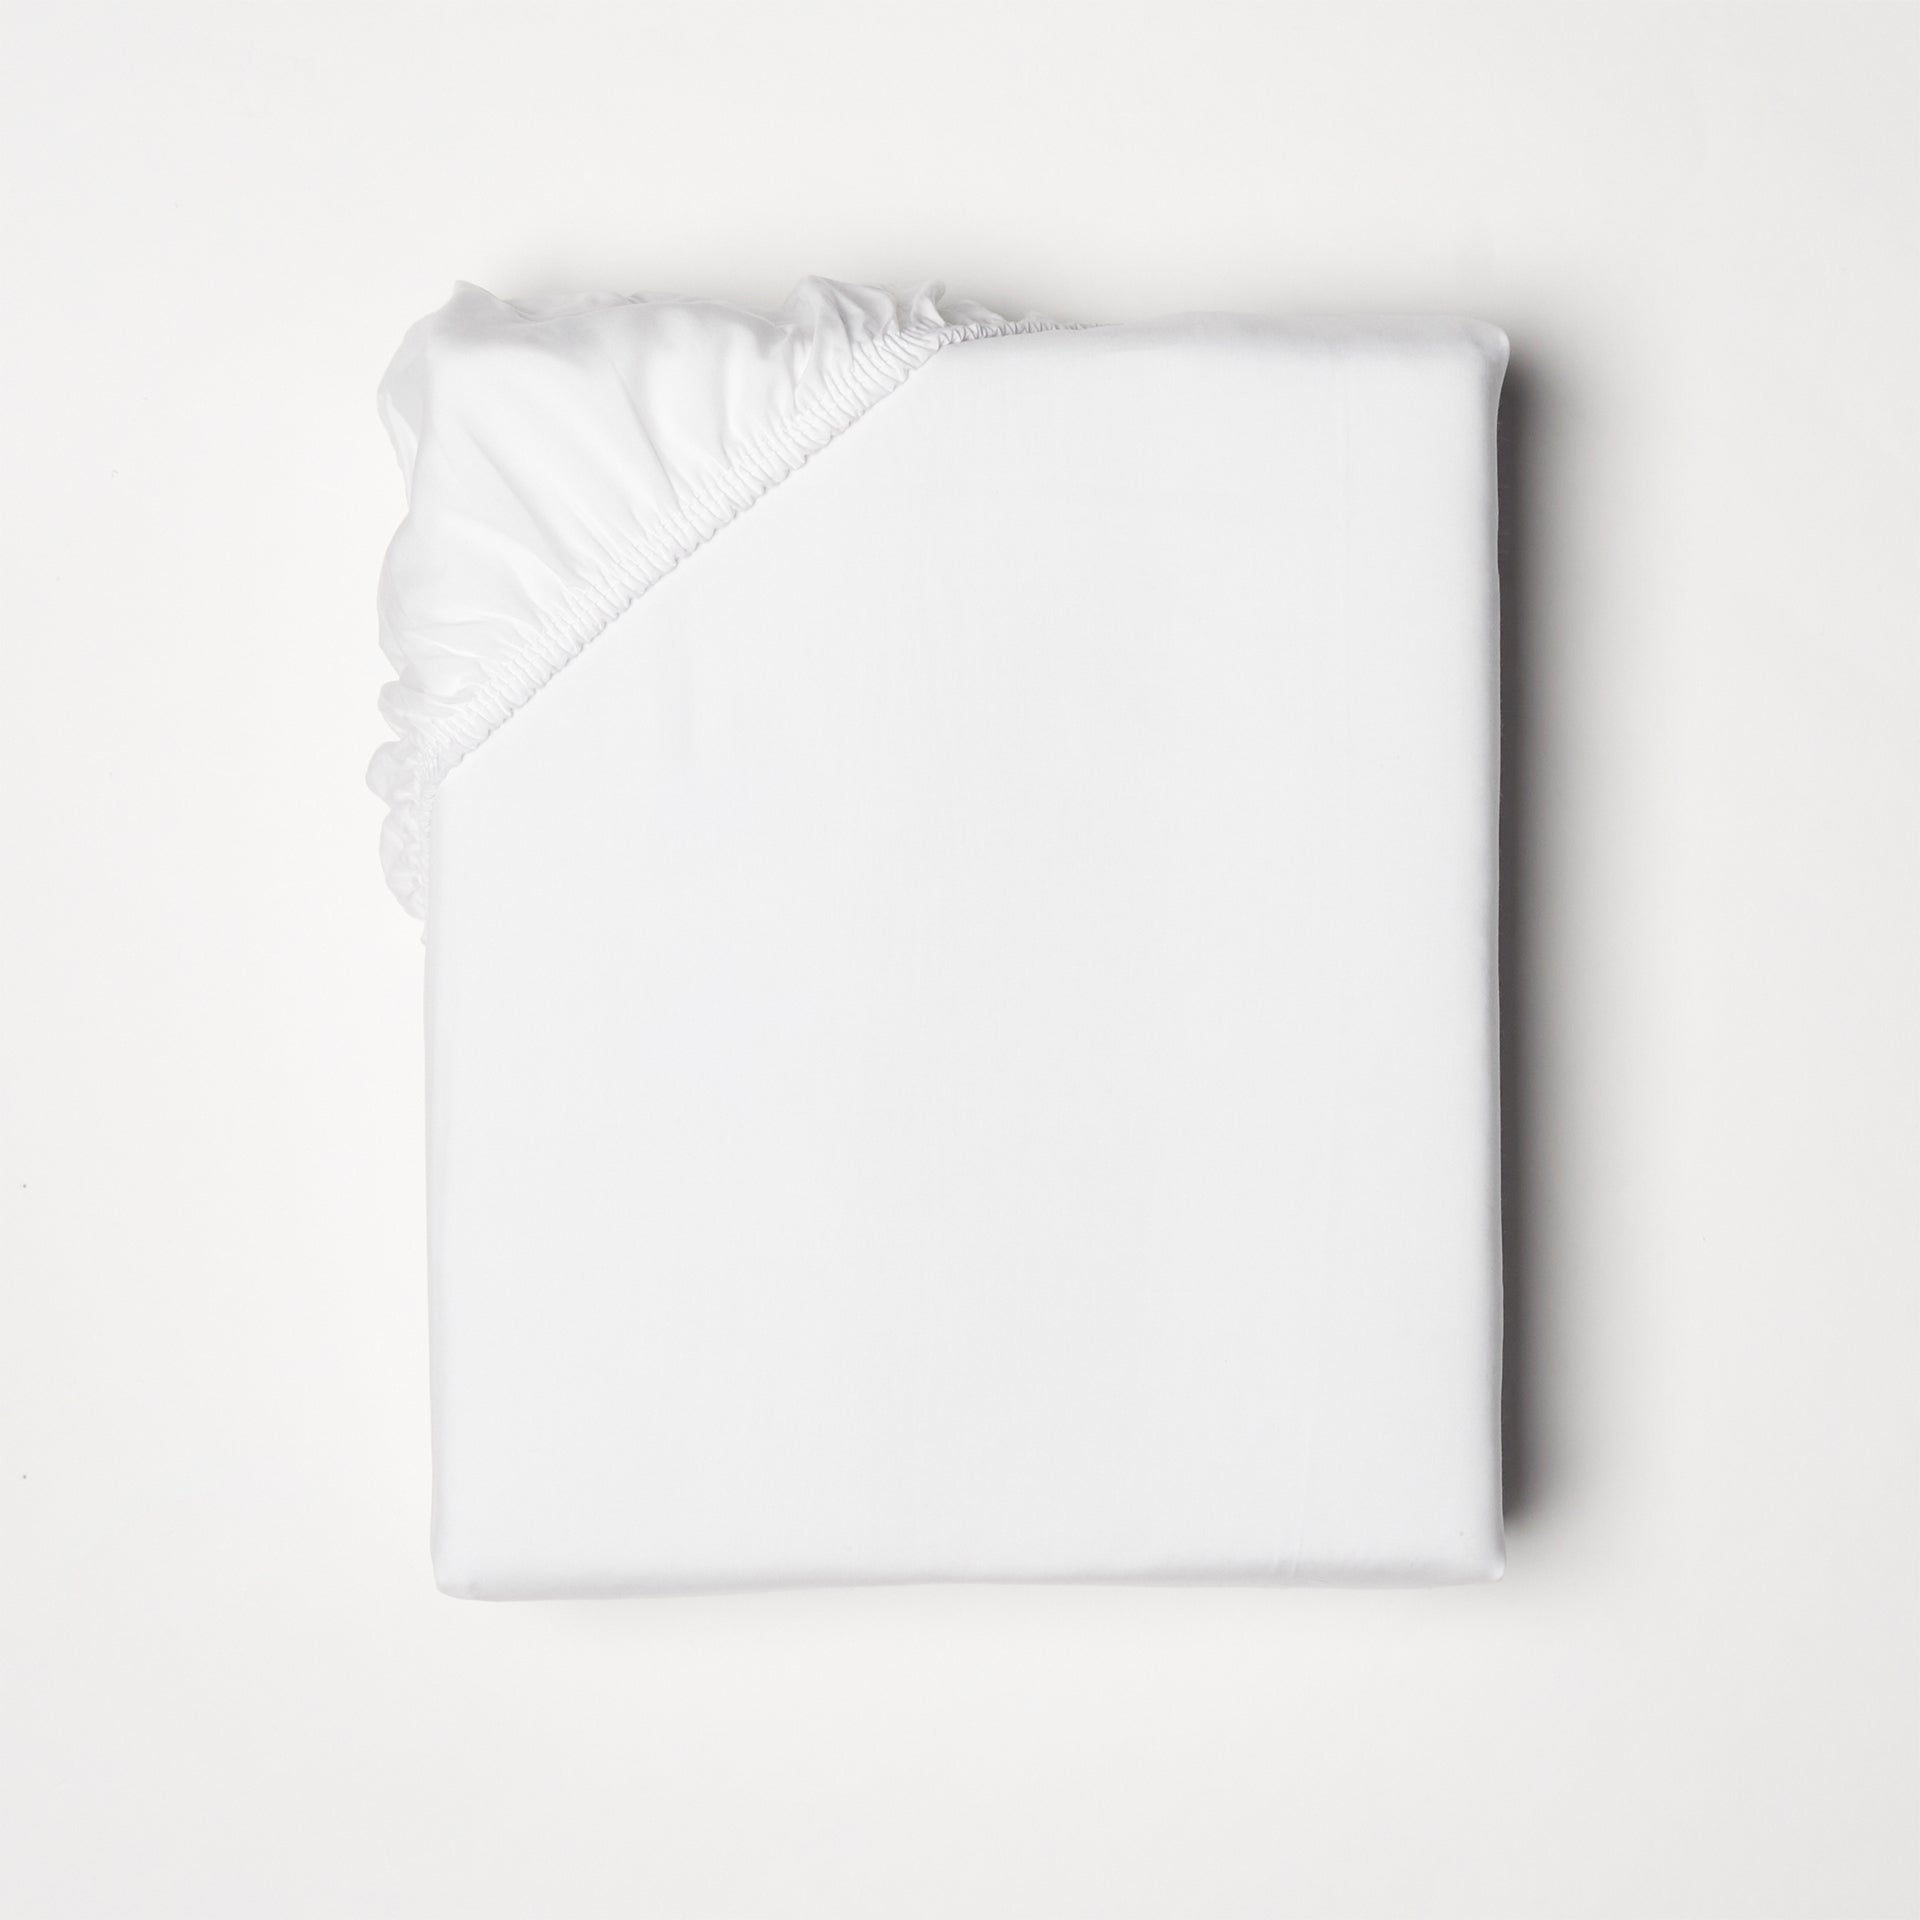 Fitted sheet offered in classic ivory and white, fits mattresses up to 18" deep with a fitted elastic skirt 